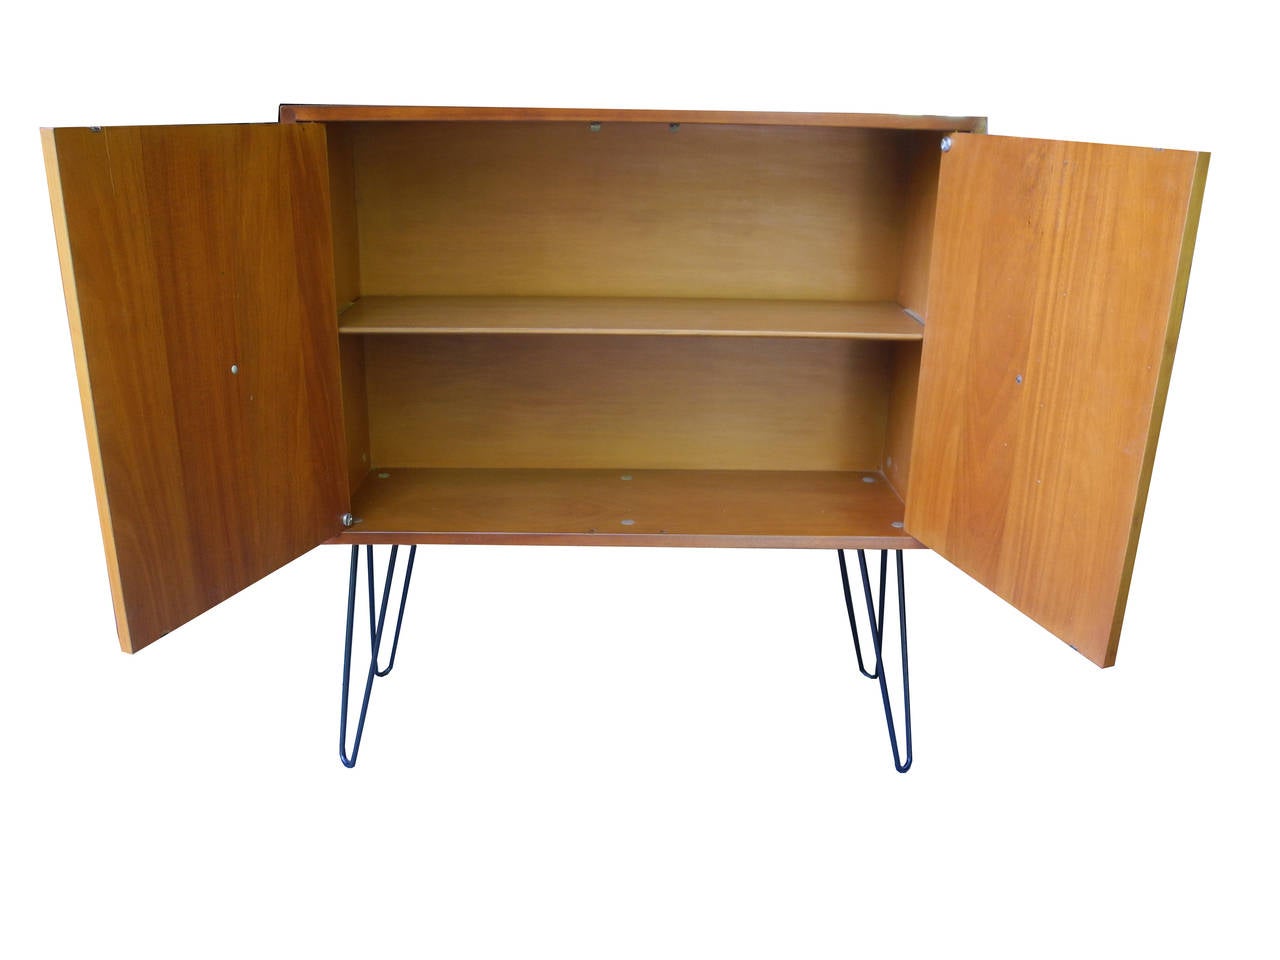 20th Century Mid-Century Modern Mahogany Storage Cabinet by Morris Sanders for Mengel Module For Sale